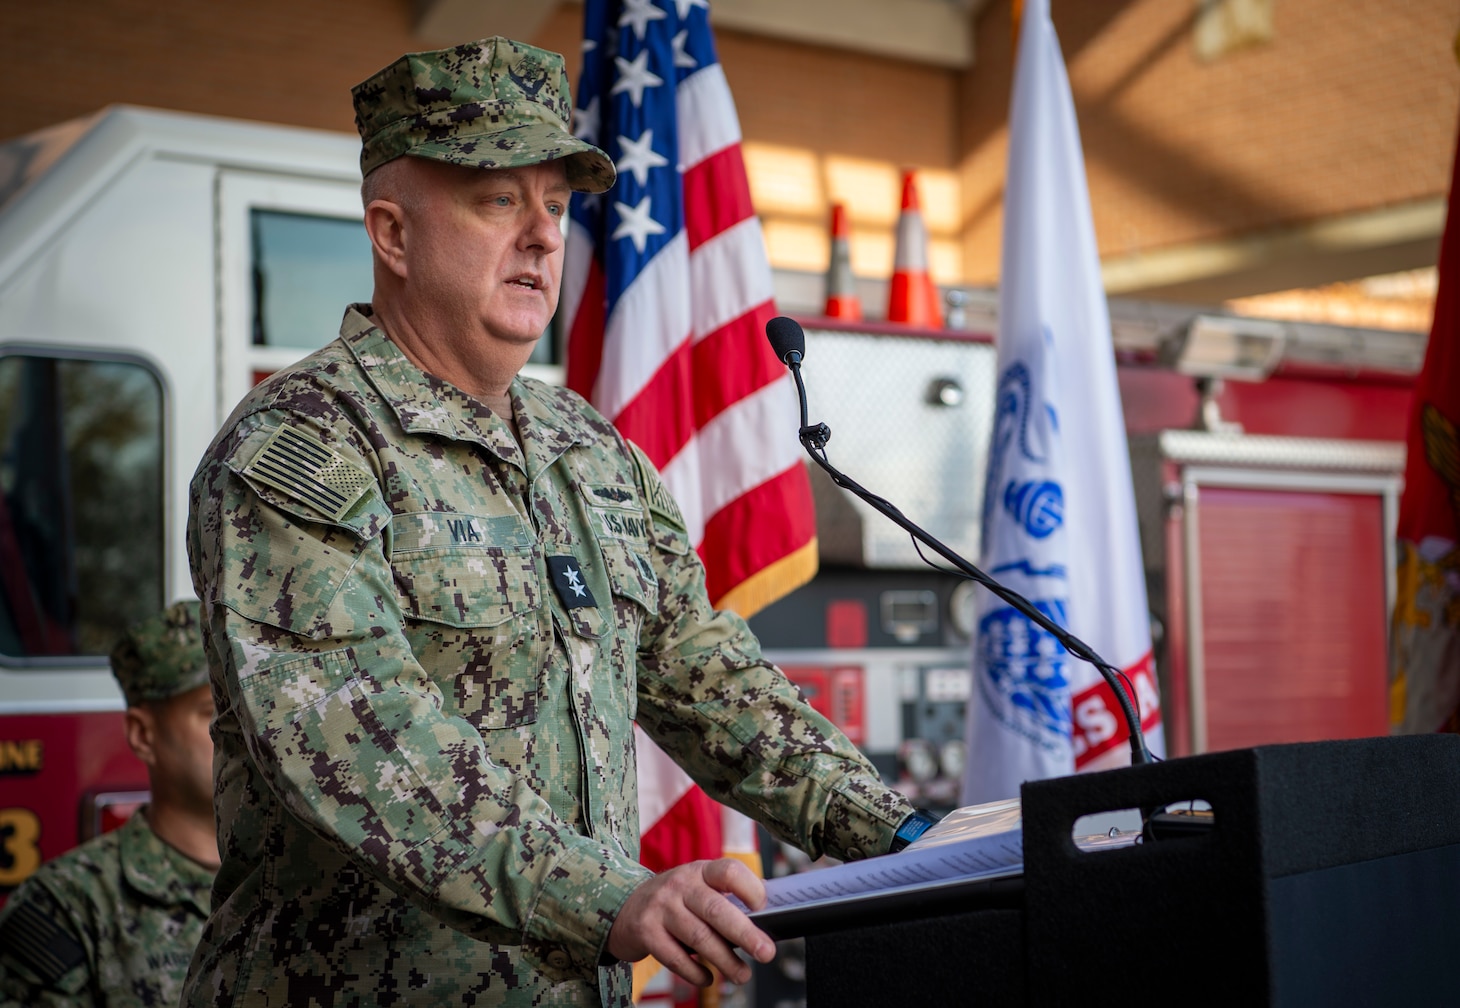 Surgeon General of the Navy Rear Adm. Darin Via speaks during a trauma center ribbon cutting ceremony in front of Naval Medical Center Portsmouth’s (NMCP) emergency room entrance on Dec. 8.